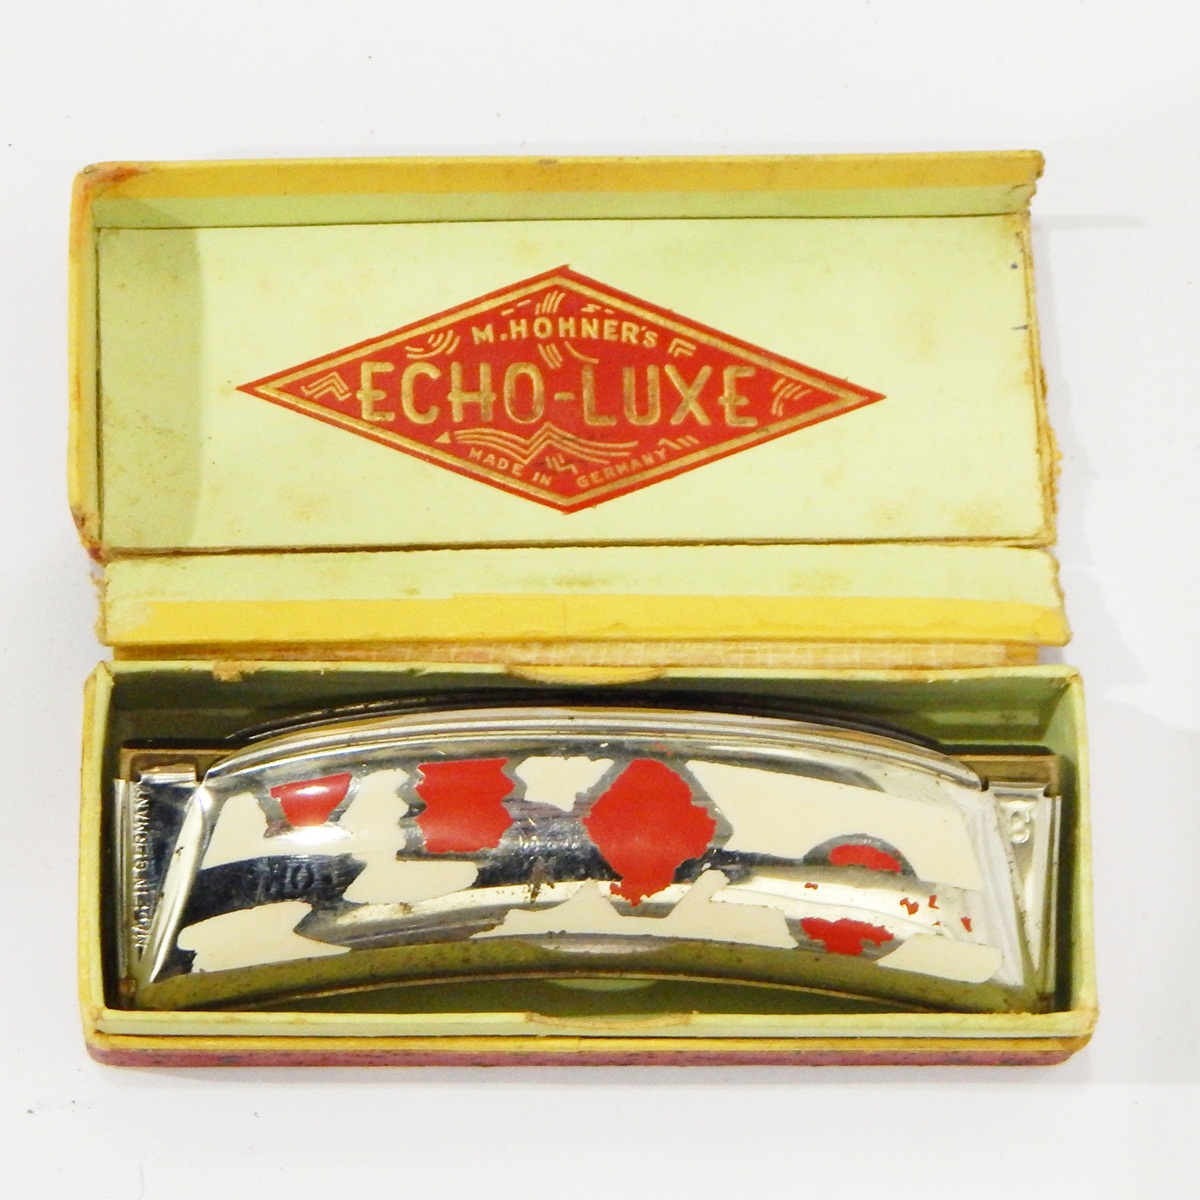 M Hohner Echo-Luxe harmonica, of crescent-shape with cream and red enamel decoration,